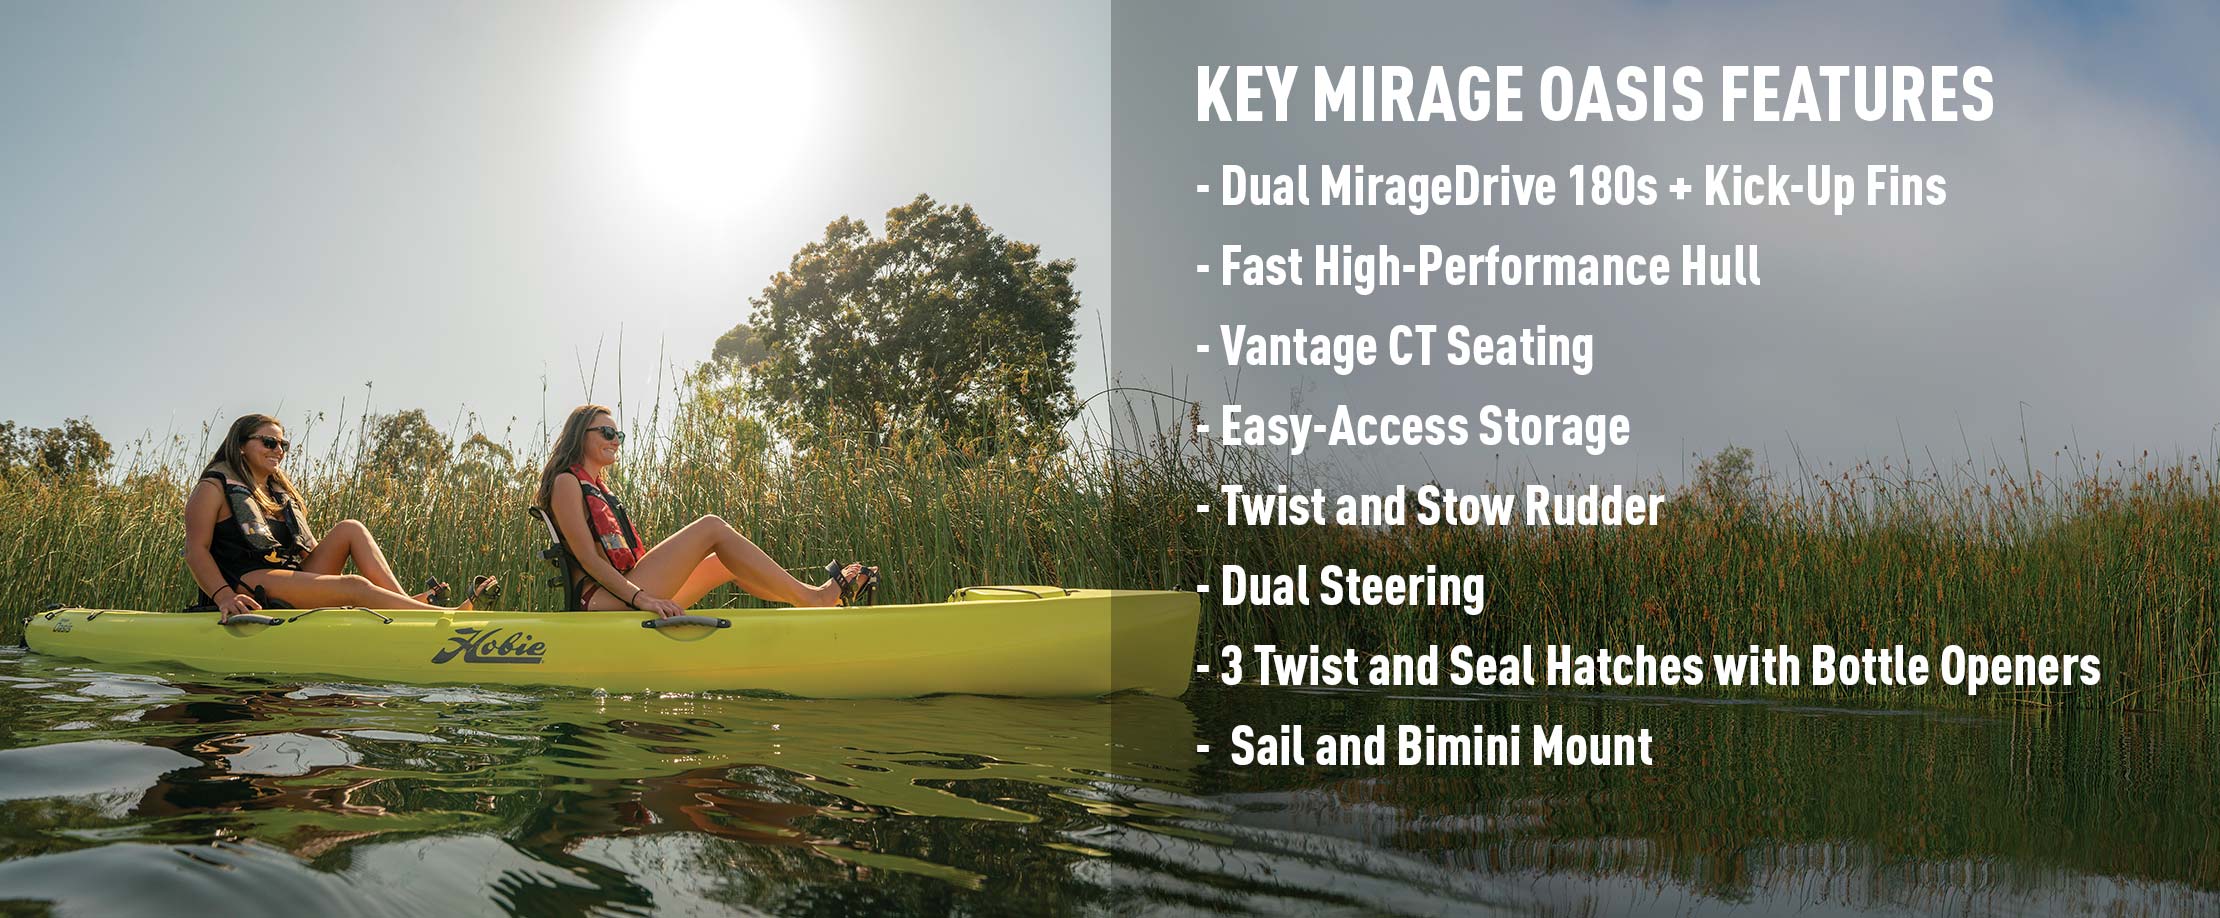 Mirage Oasis Features